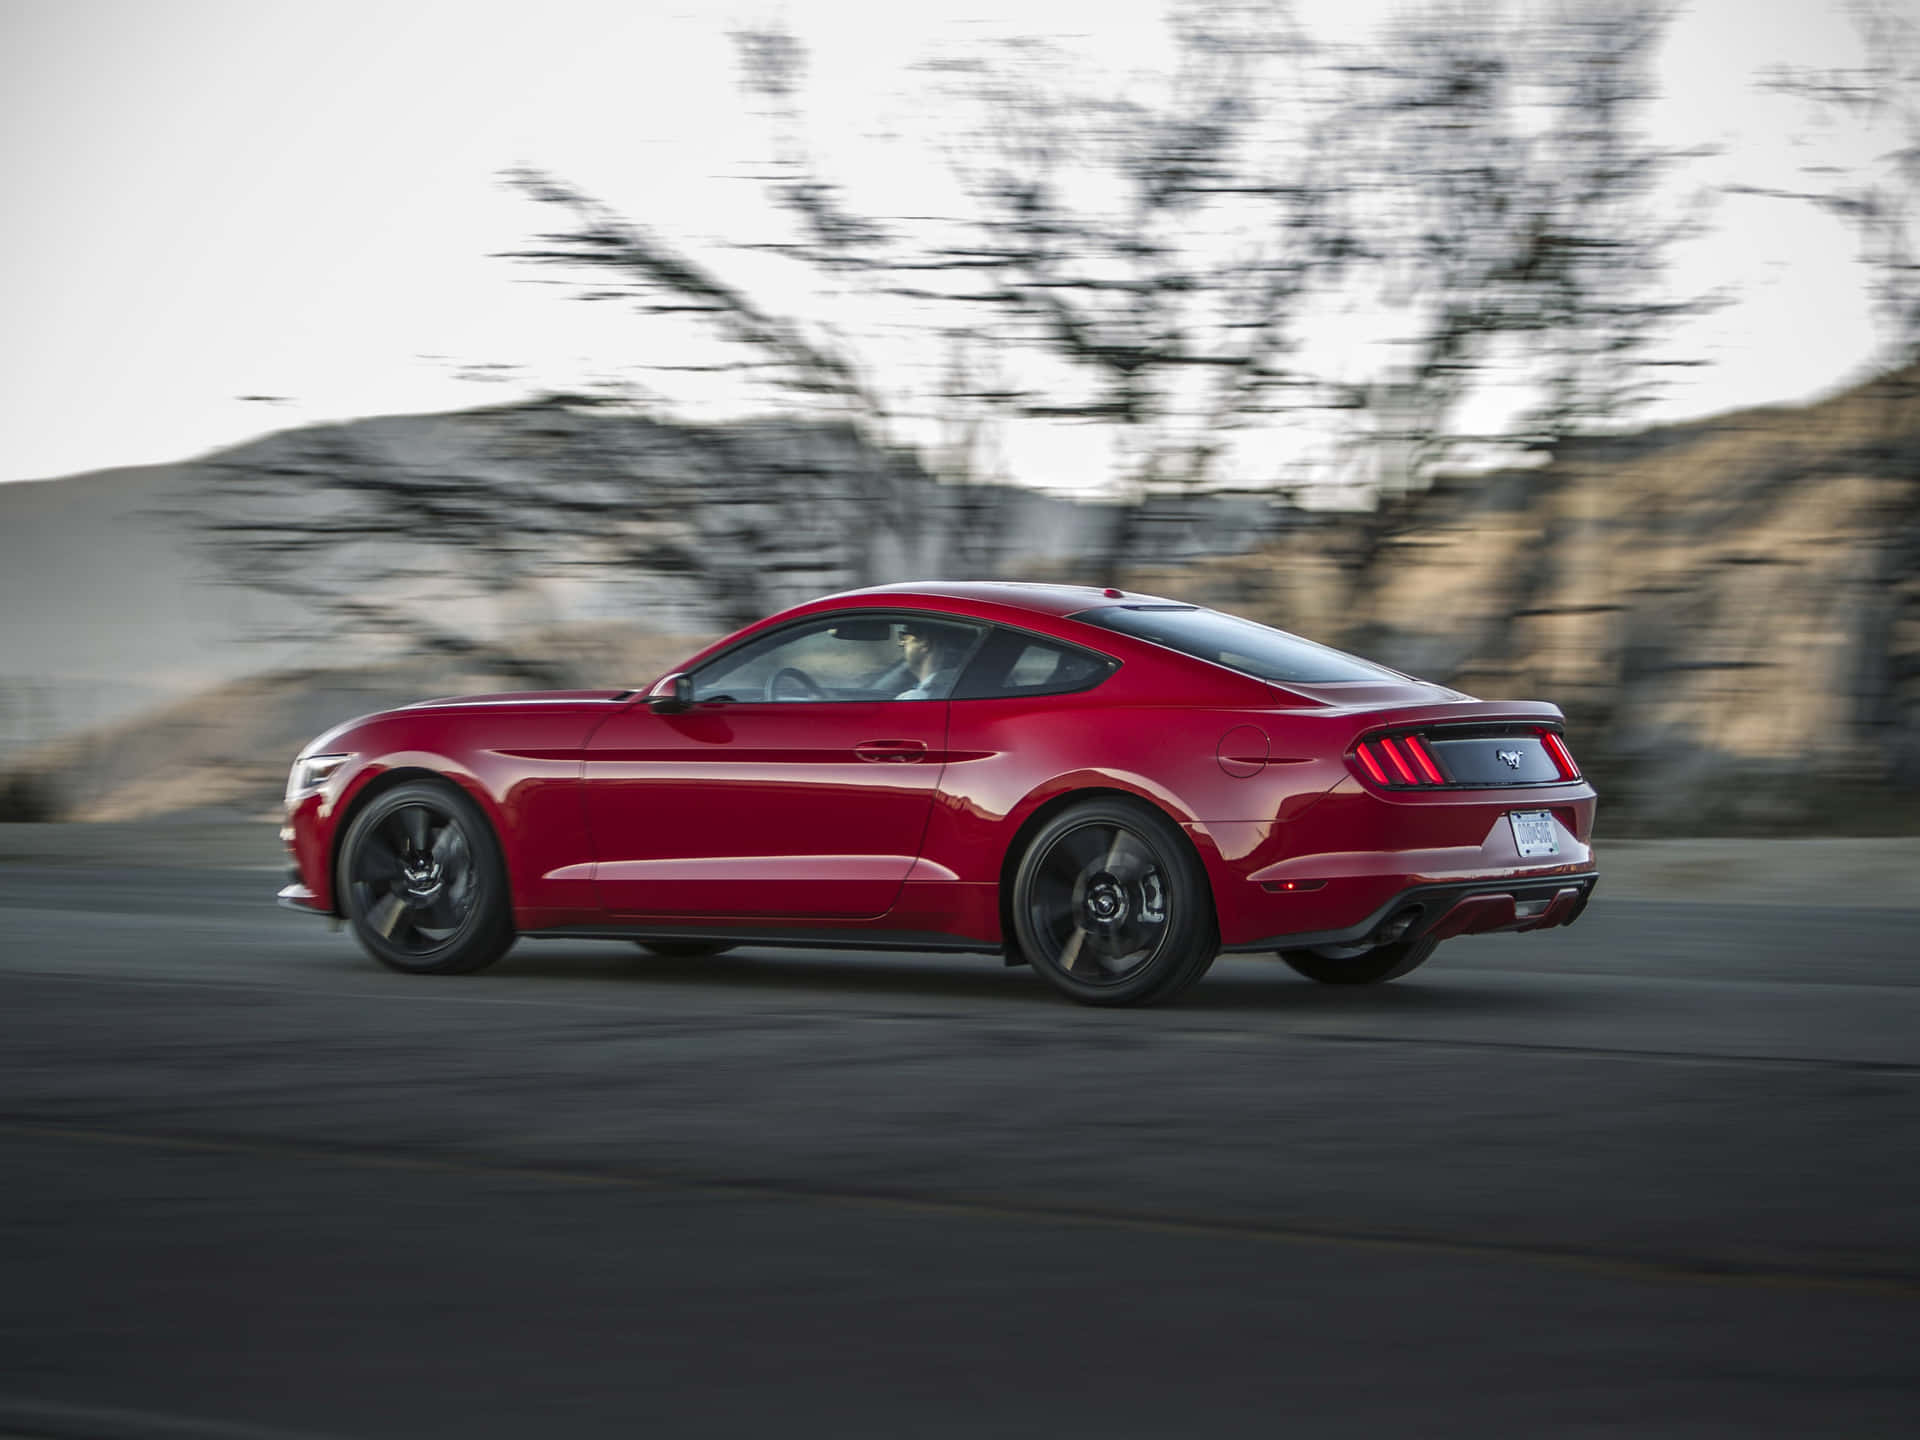 Sleek and Powerful Ford Mustang Ecoboost on the Road Wallpaper